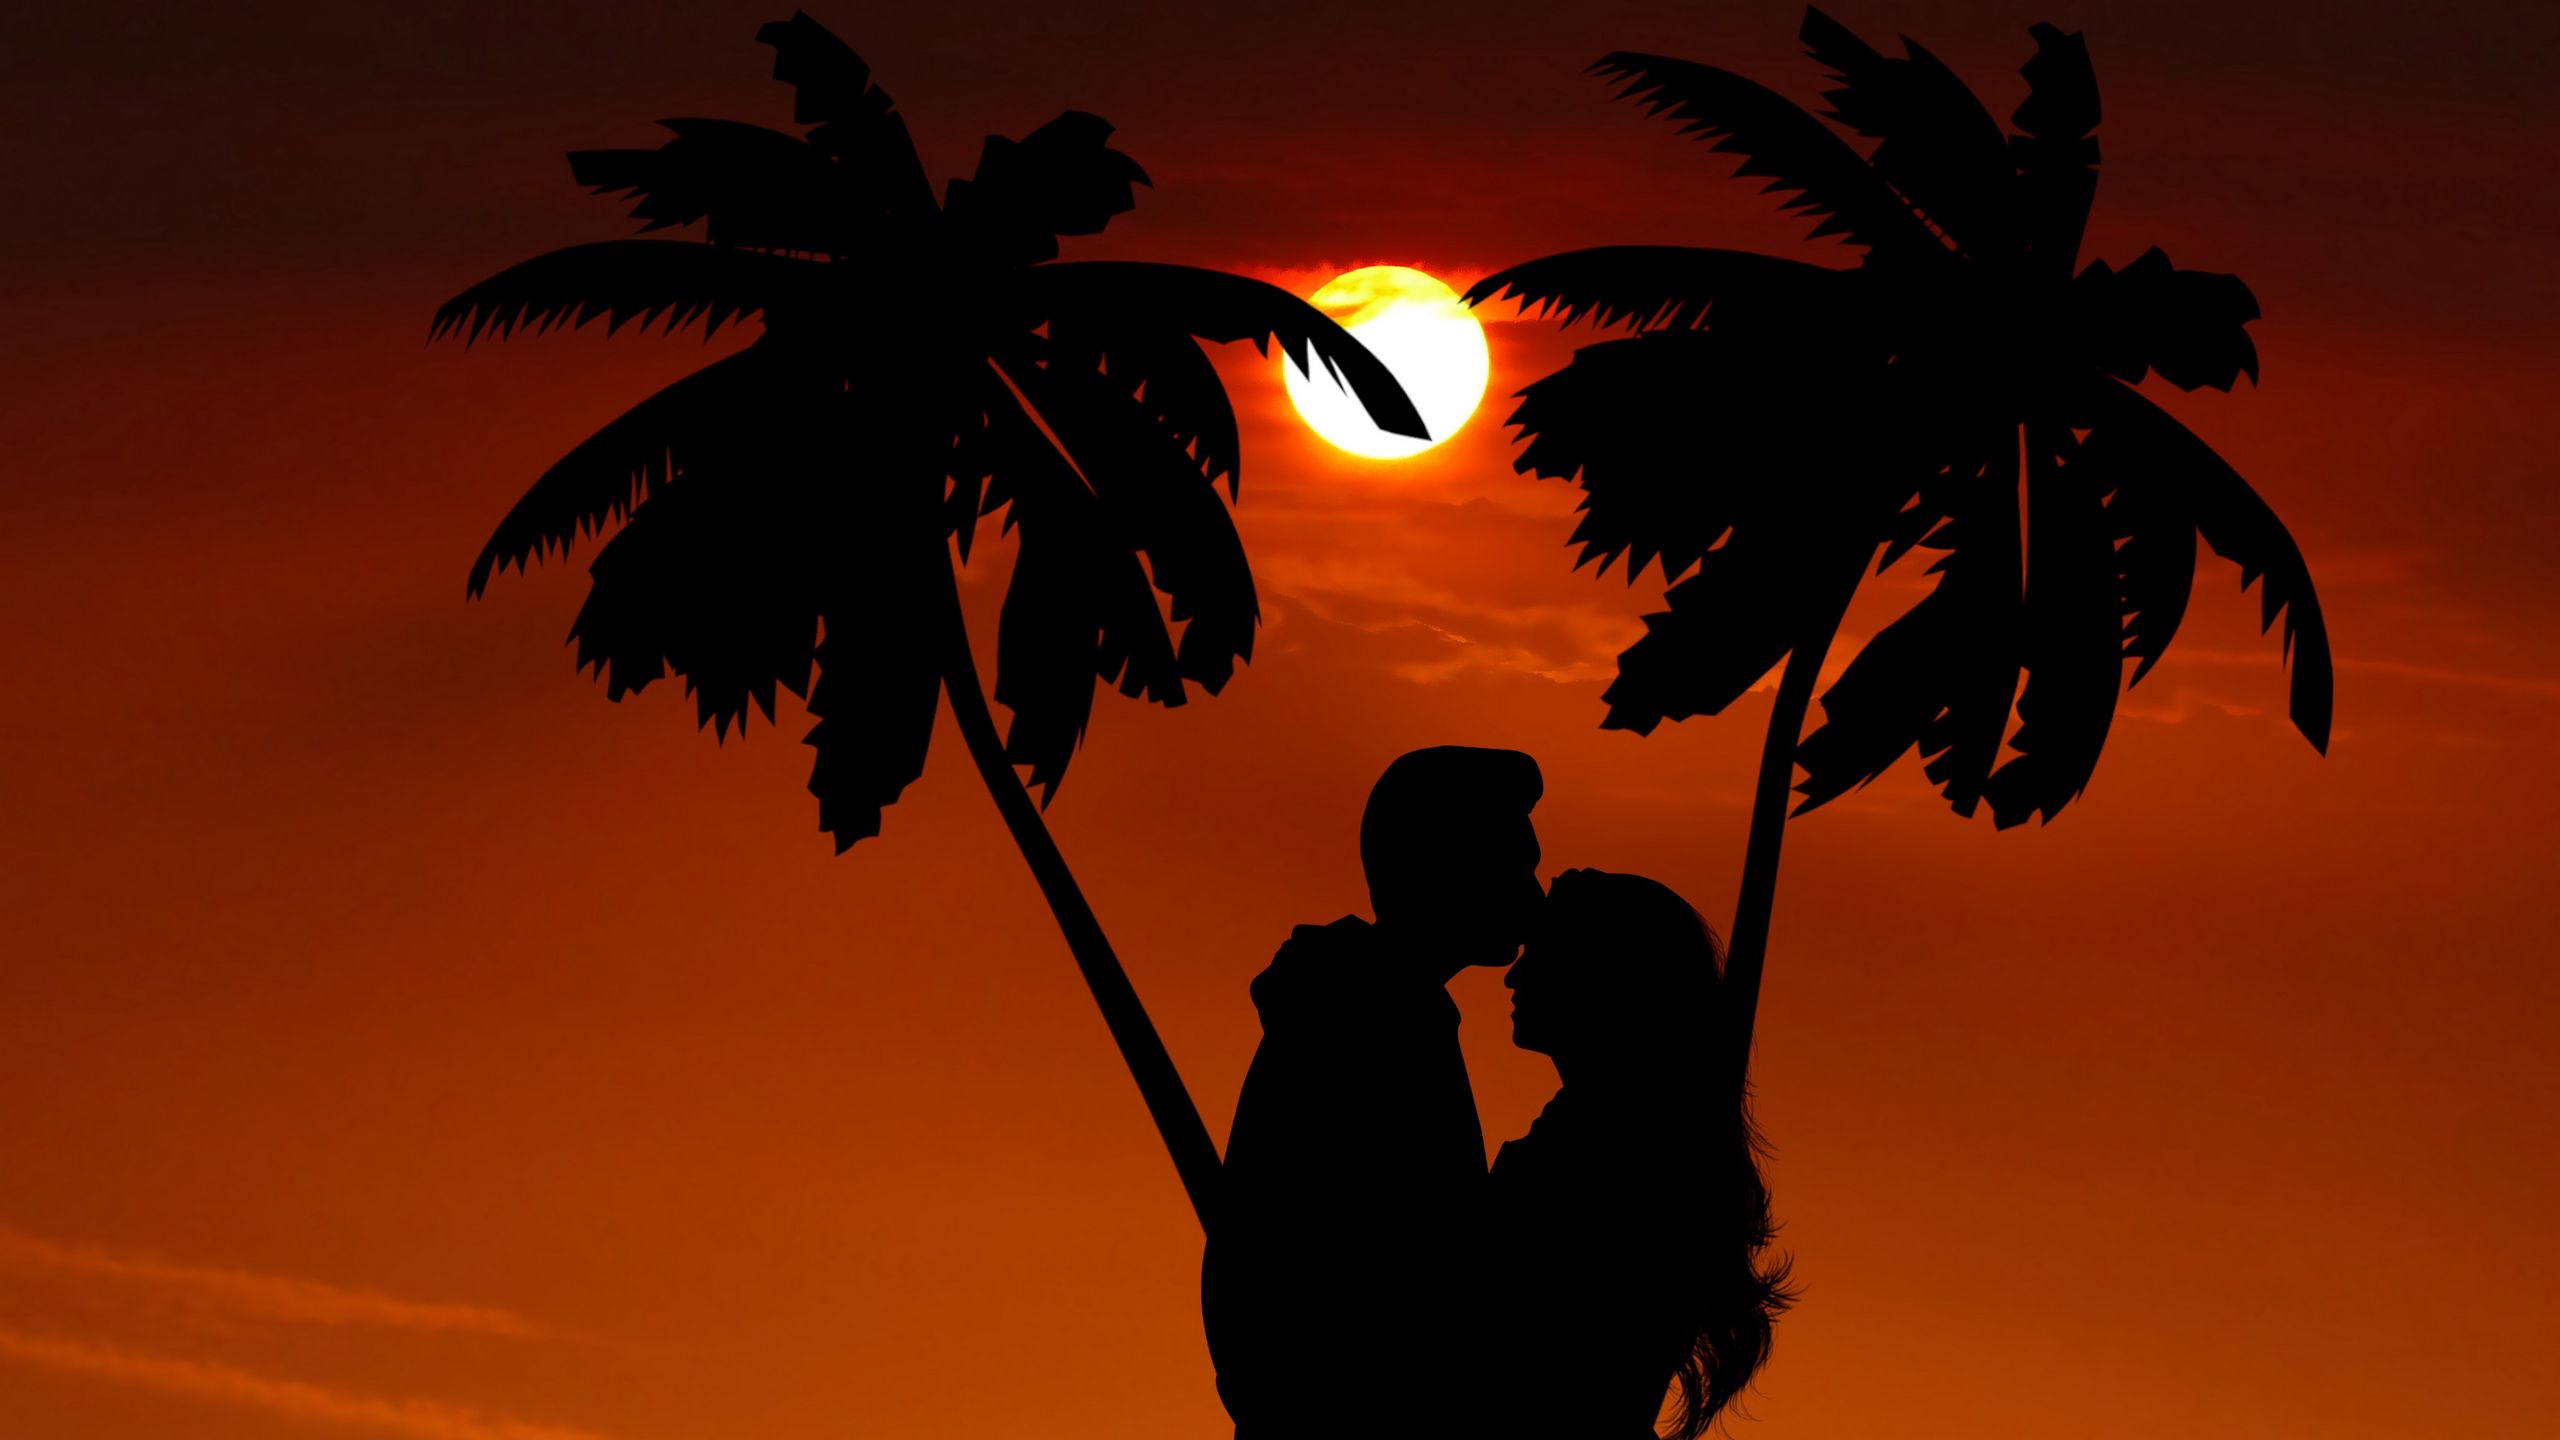 Download wallpaper 2560x1440 silhouettes, couple, hug, palm, night ...